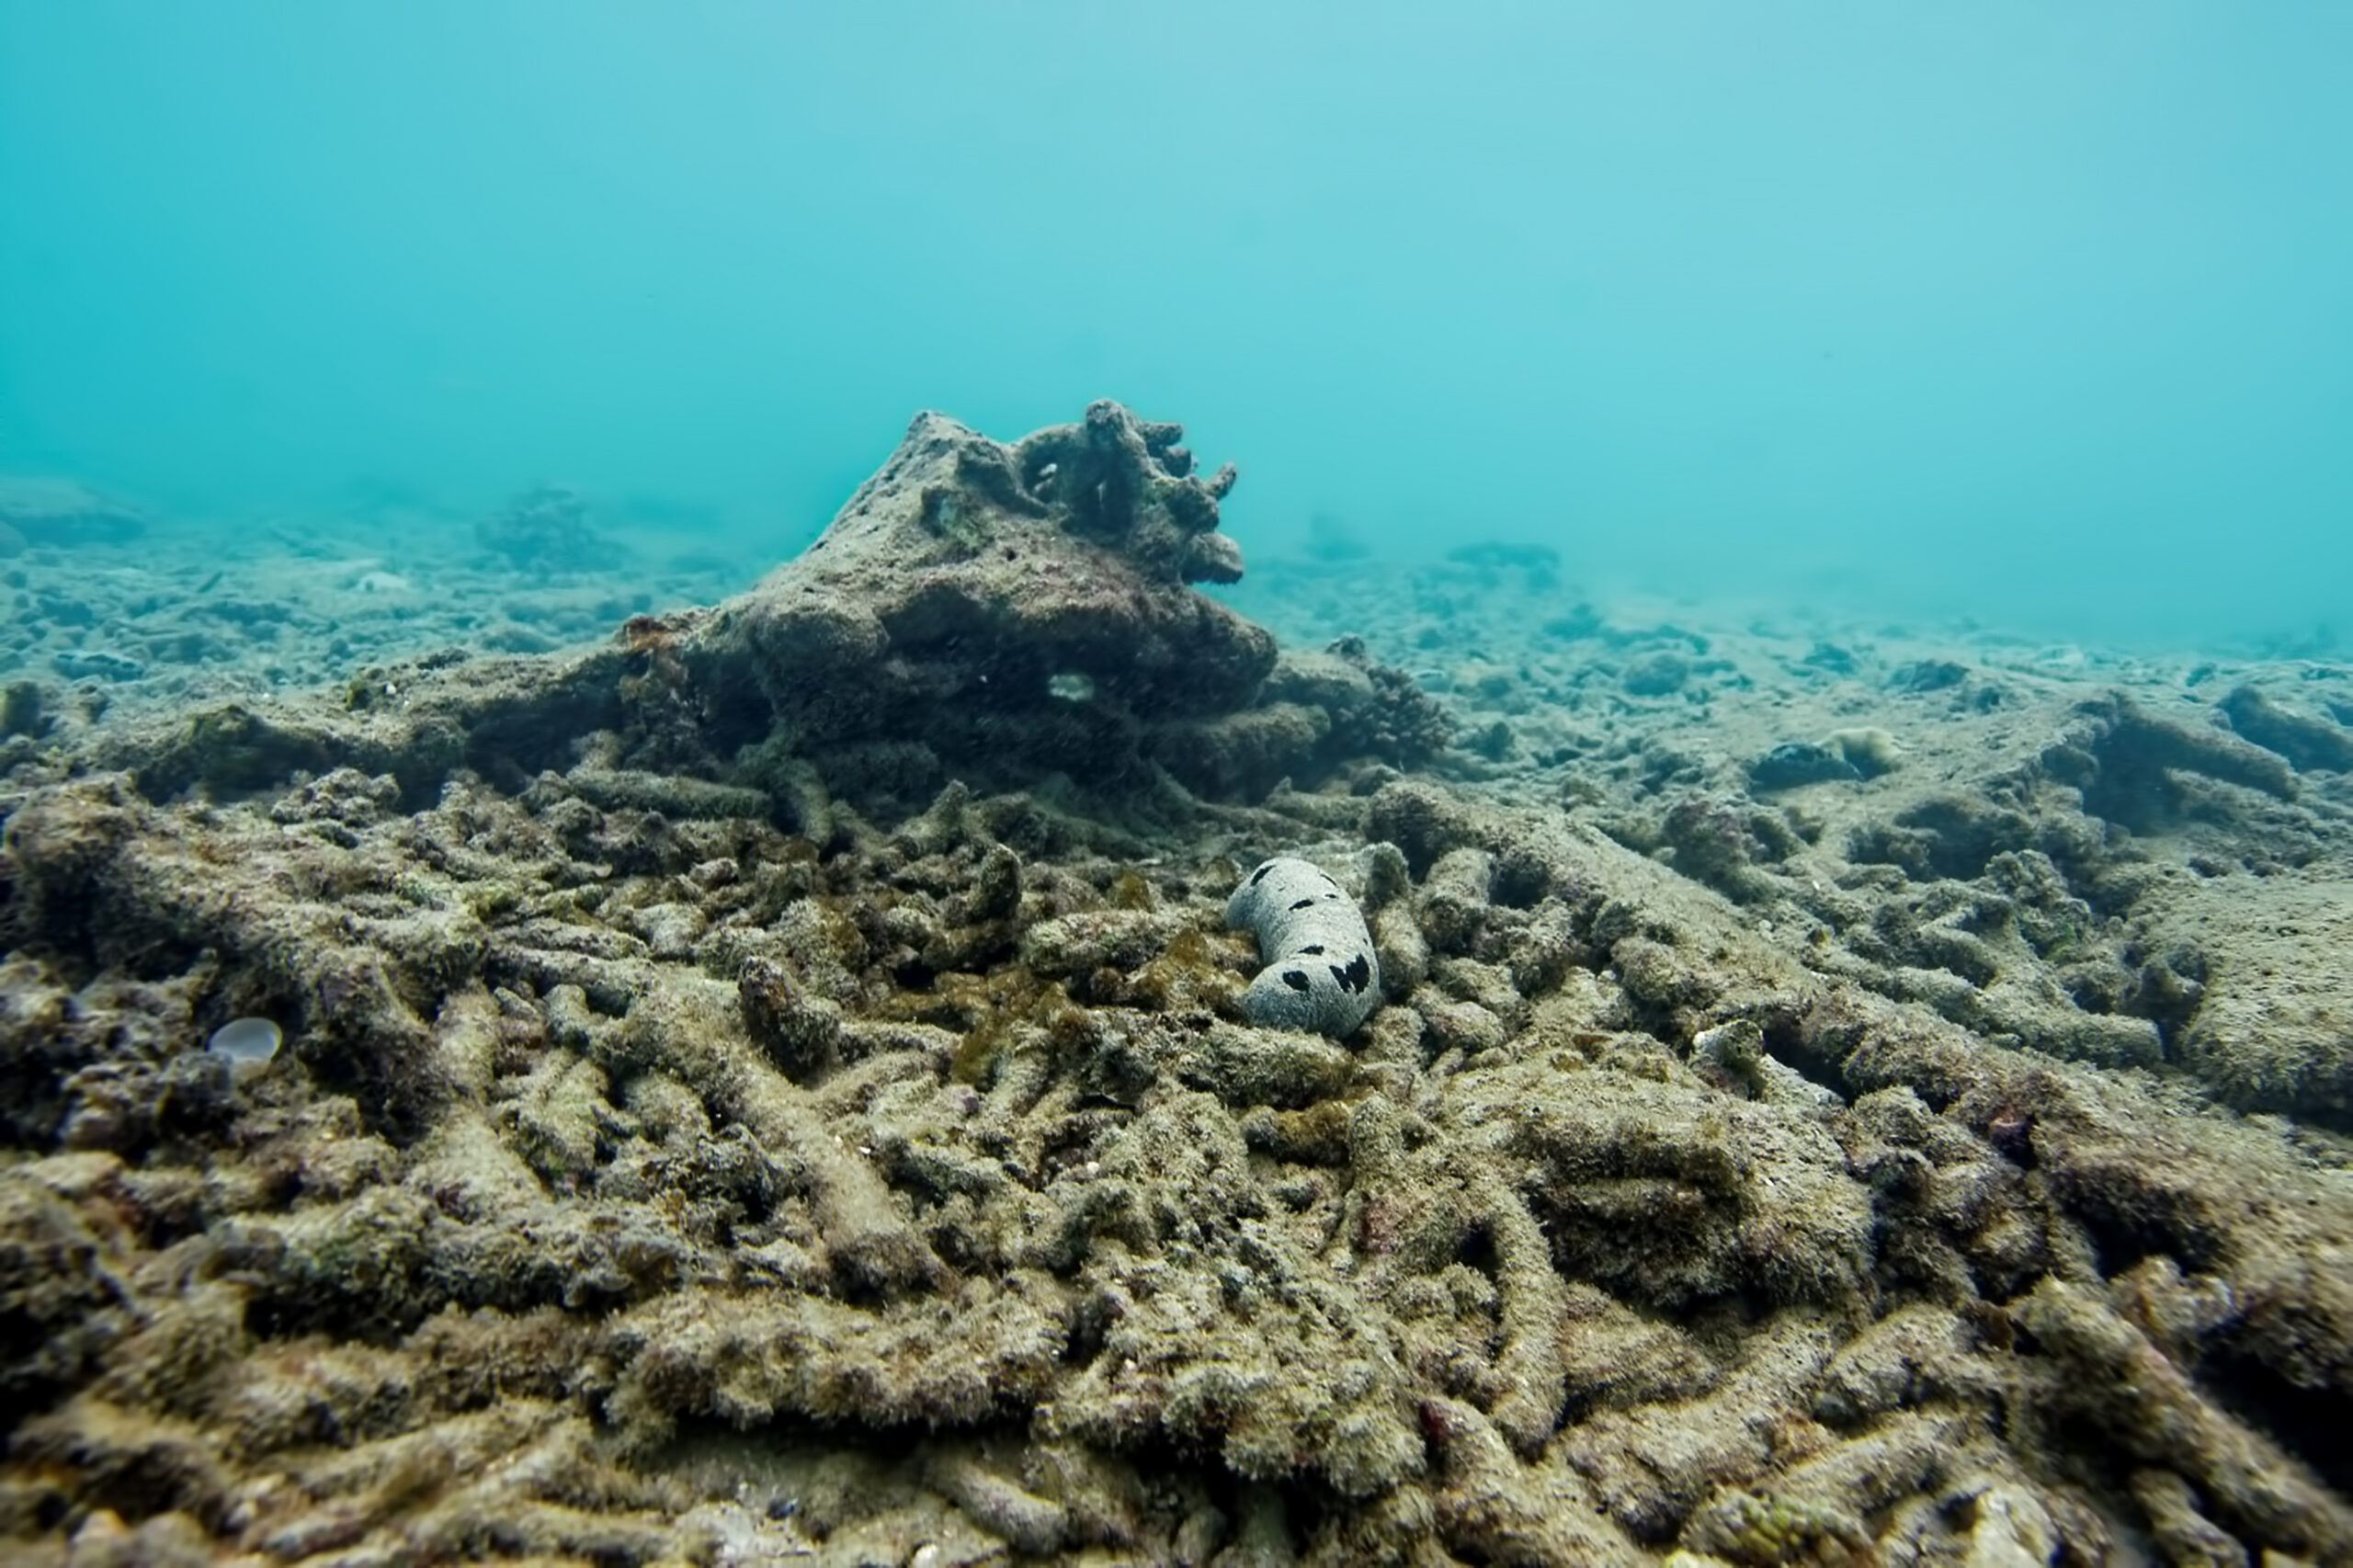 survival rates, reef resilience network